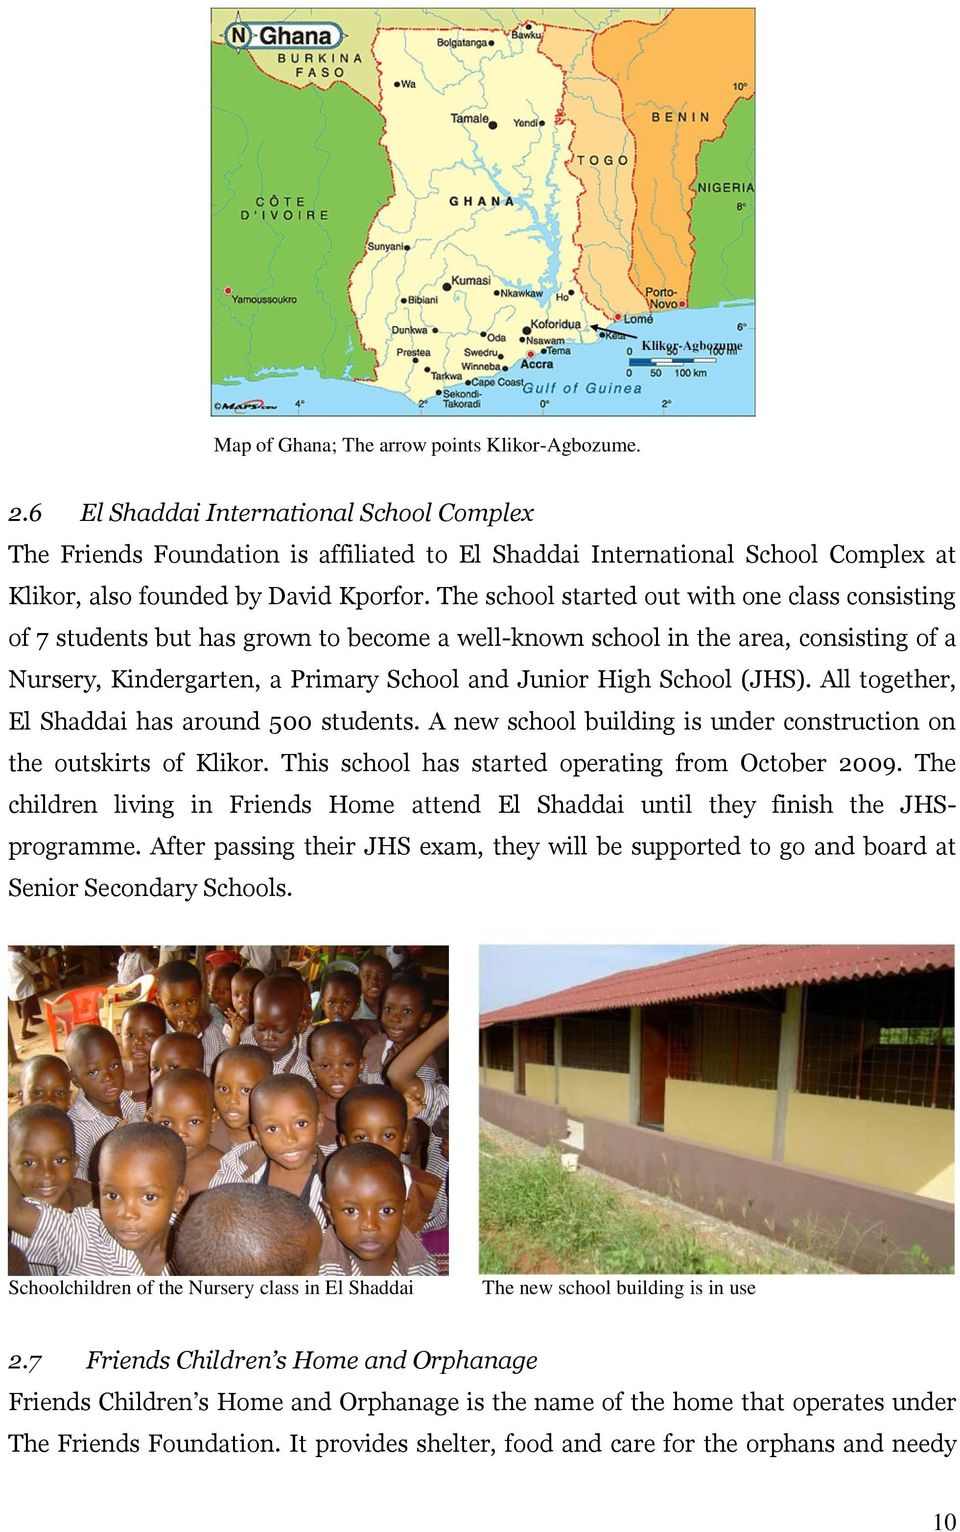 The school started out with one class consisting of 7 students but has grown to become a well-known school in the area, consisting of a Nursery, Kindergarten, a Primary School and Junior High School